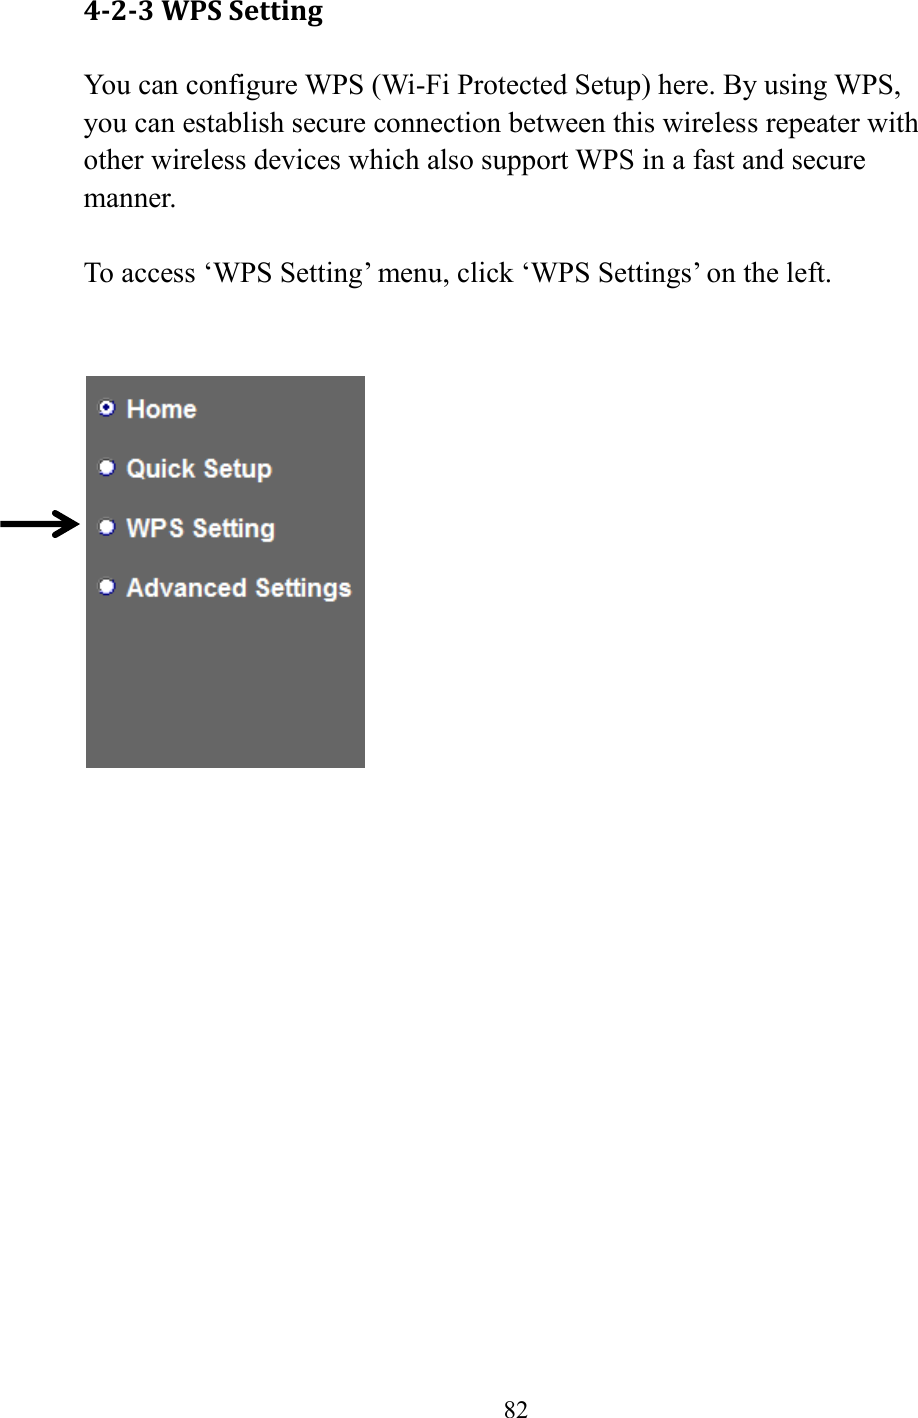  82  4-2-3 WPS Setting You can configure WPS (Wi-Fi Protected Setup) here. By using WPS, you can establish secure connection between this wireless repeater with other wireless devices which also support WPS in a fast and secure manner.  To access ‘WPS Setting’ menu, click ‘WPS Settings’ on the left.       